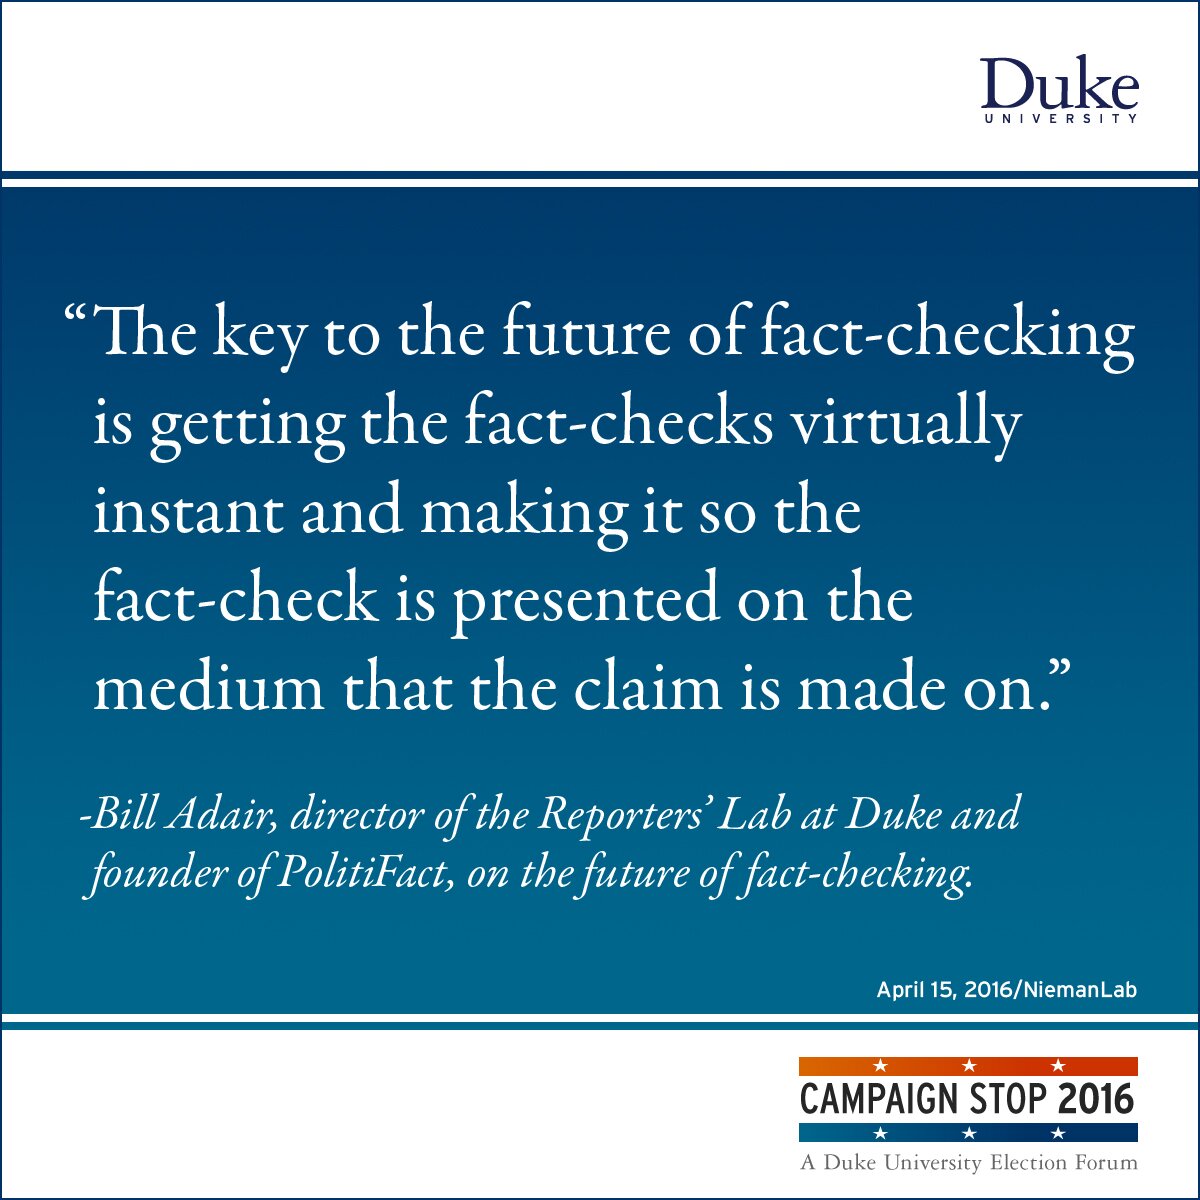 “The key to the future of fact-checking is getting the fact-checks virtually instant and making it so the fact-check is presented on the medium that the claim is made on.” -Bill Adair, director of the Reporters’ Lab at Duke and founder of PolitiFact, on the future of fact-checking.